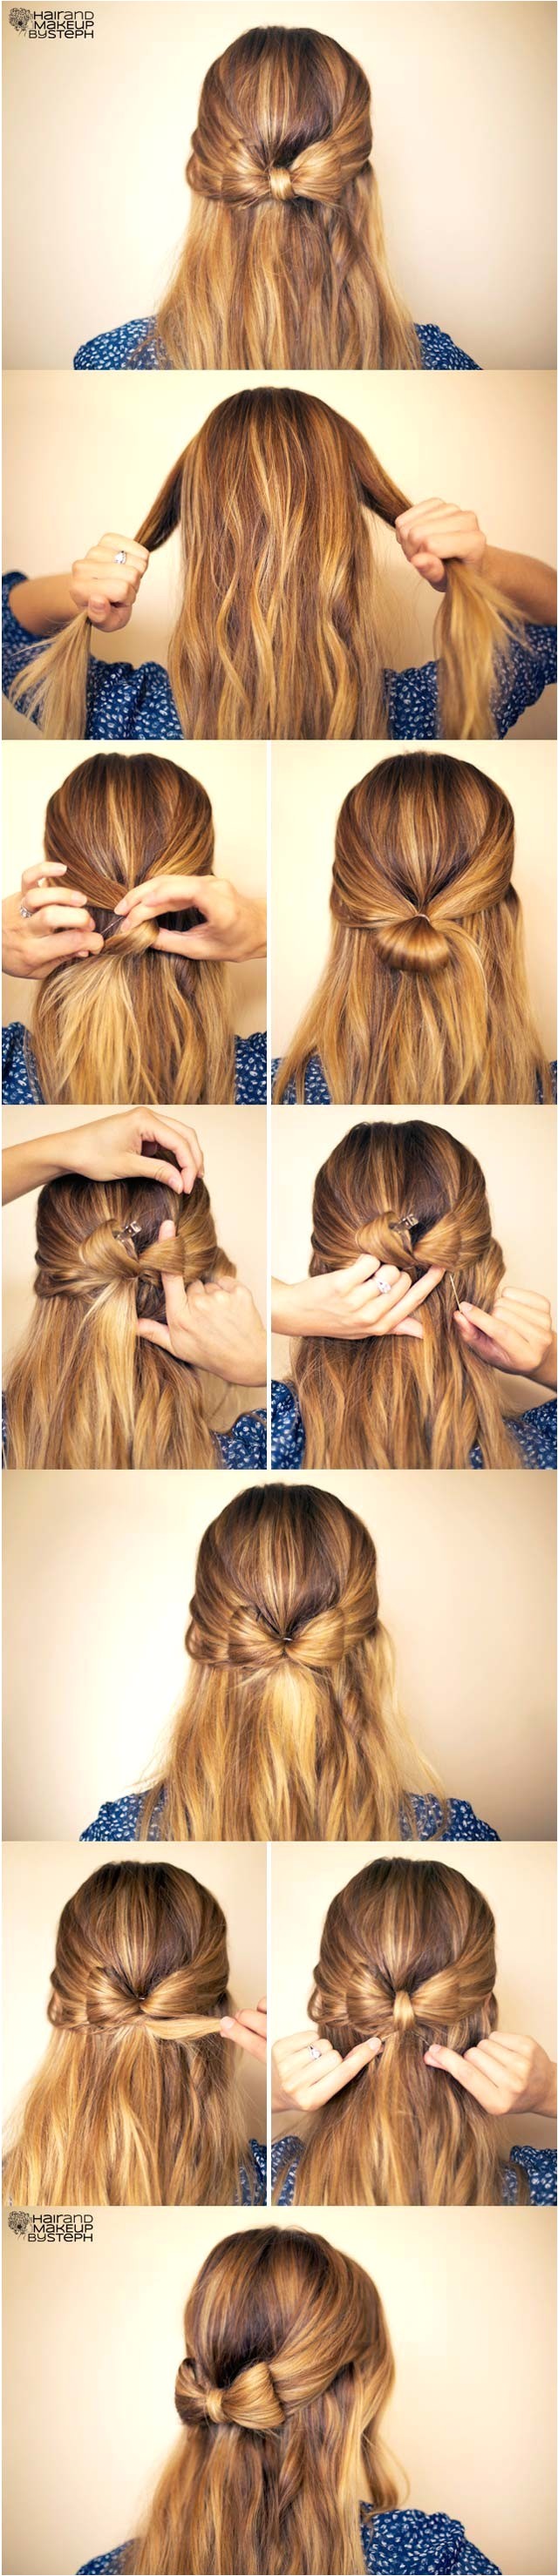 16 pretty long hairstyles with tutorials